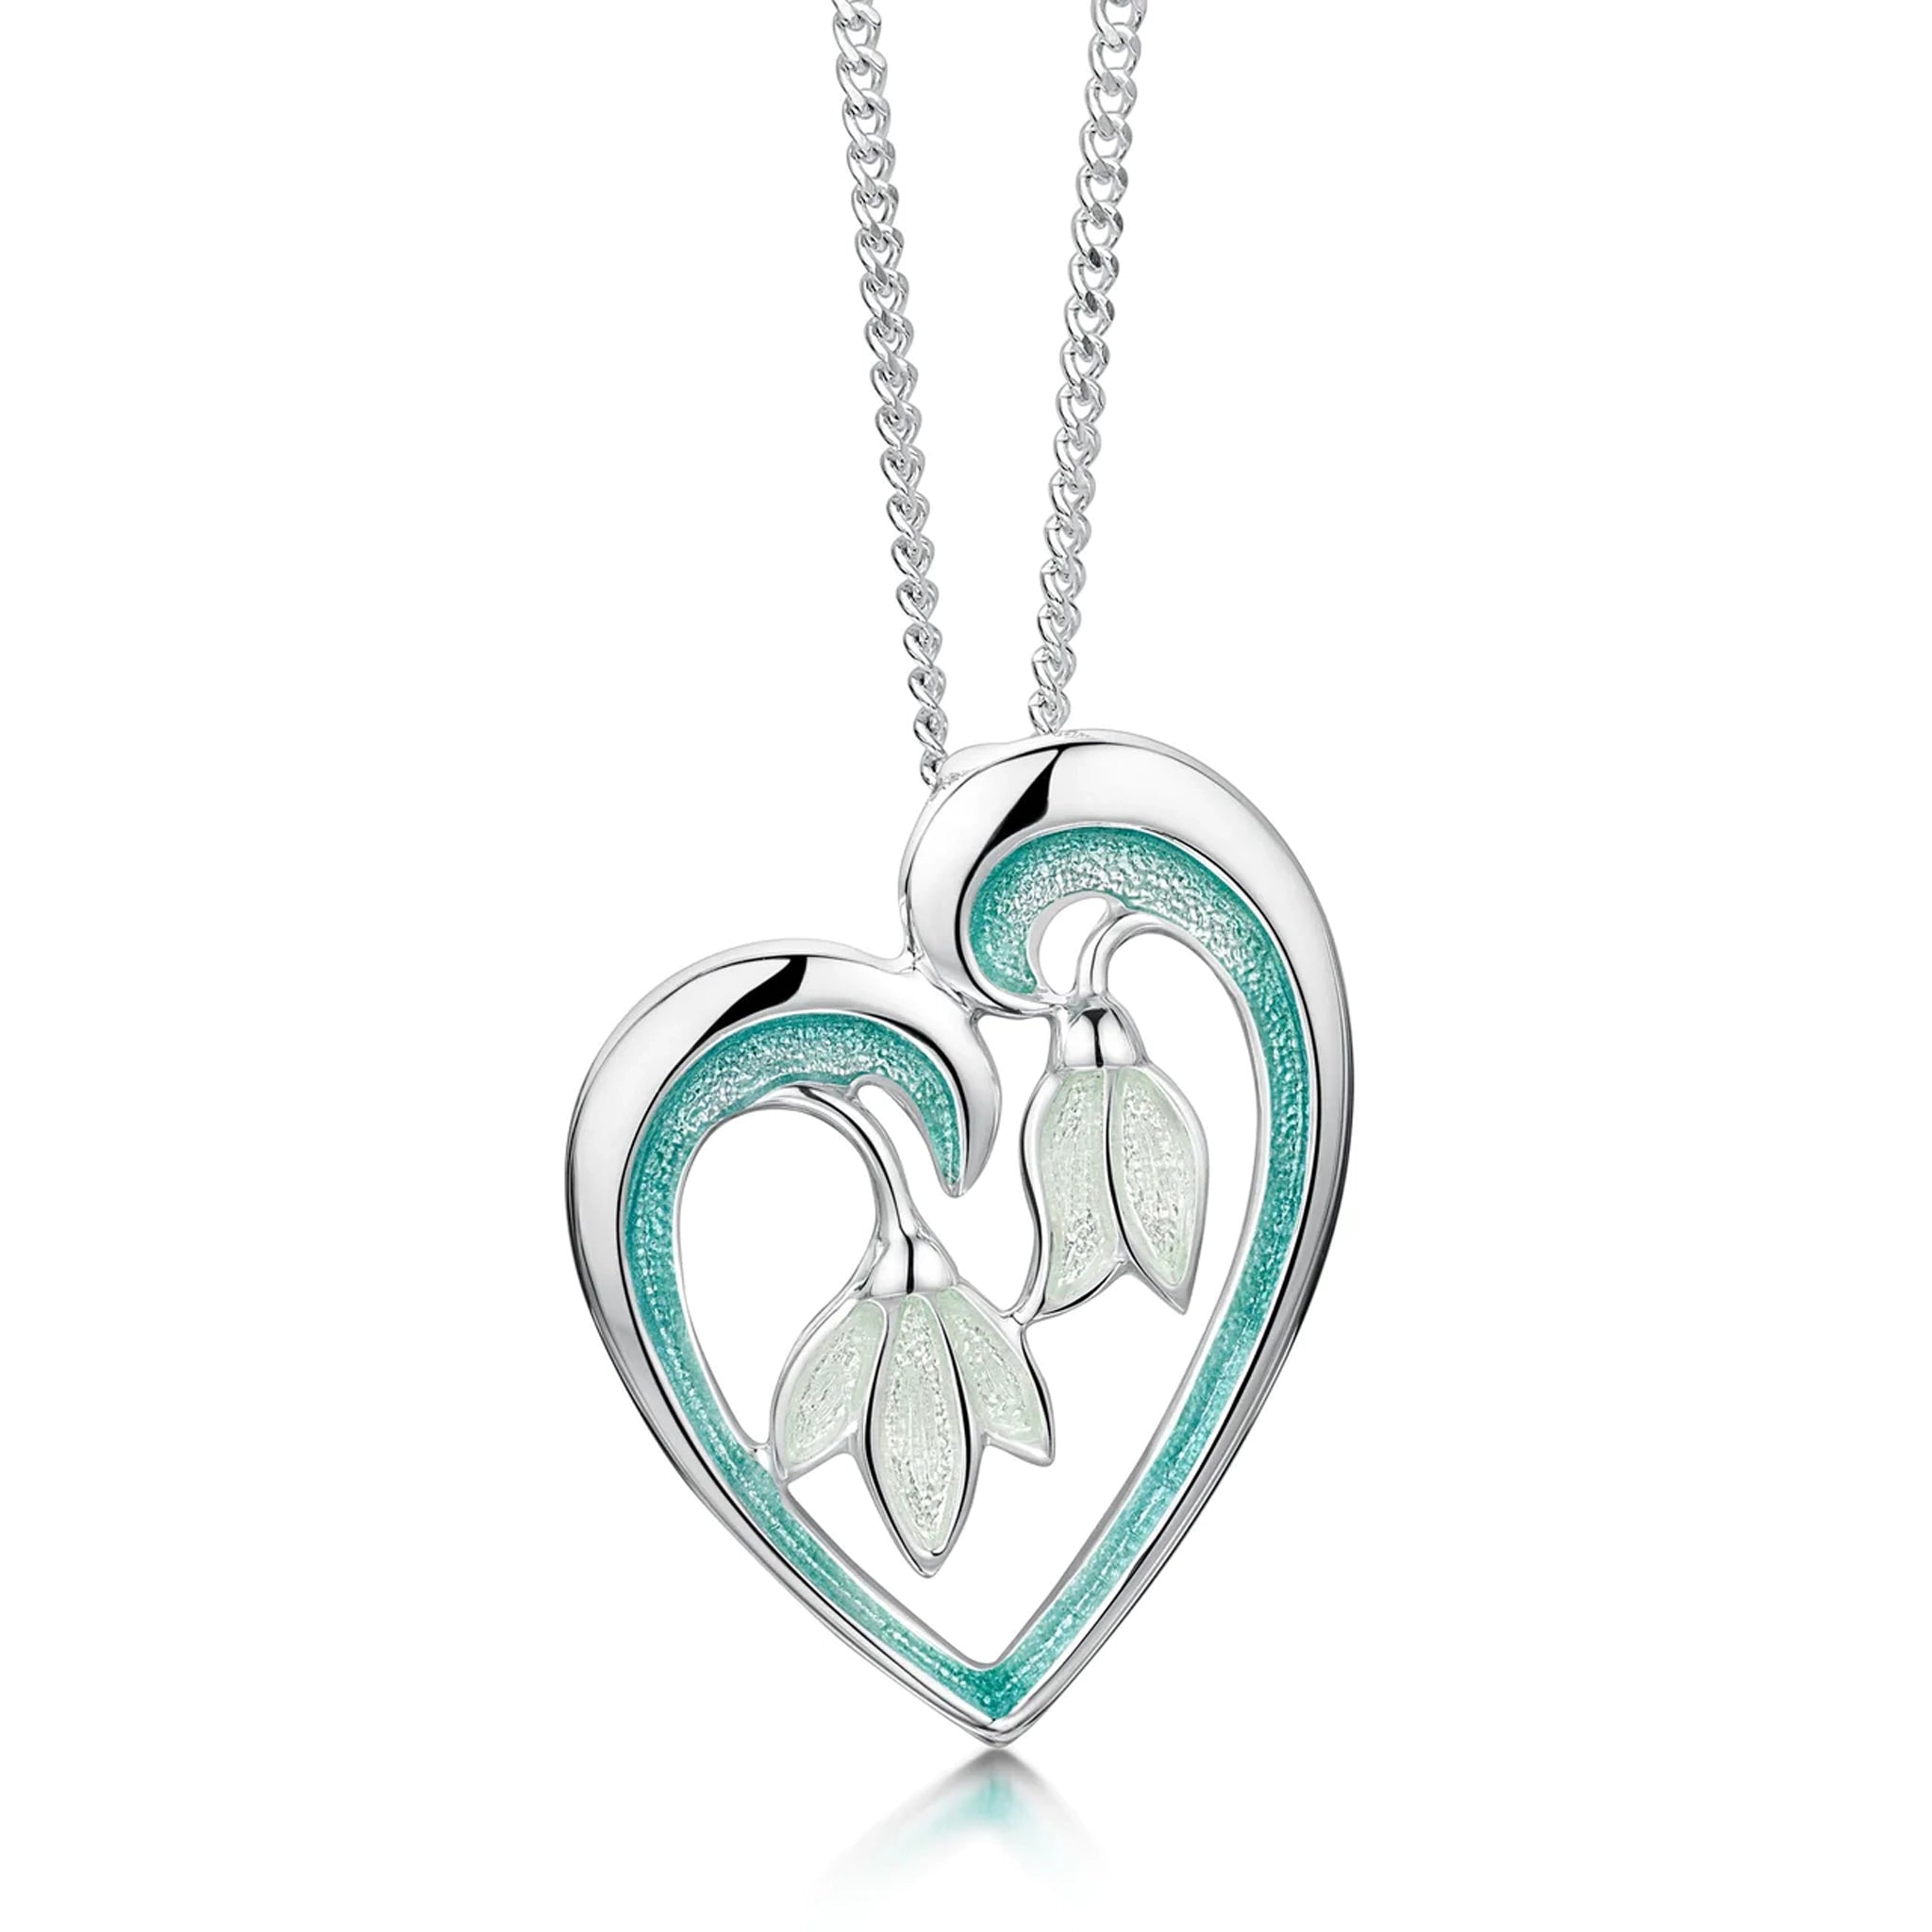 Silver pendant in a heart shape with double snowdrop flowers in a green and white enamel on a silver chain